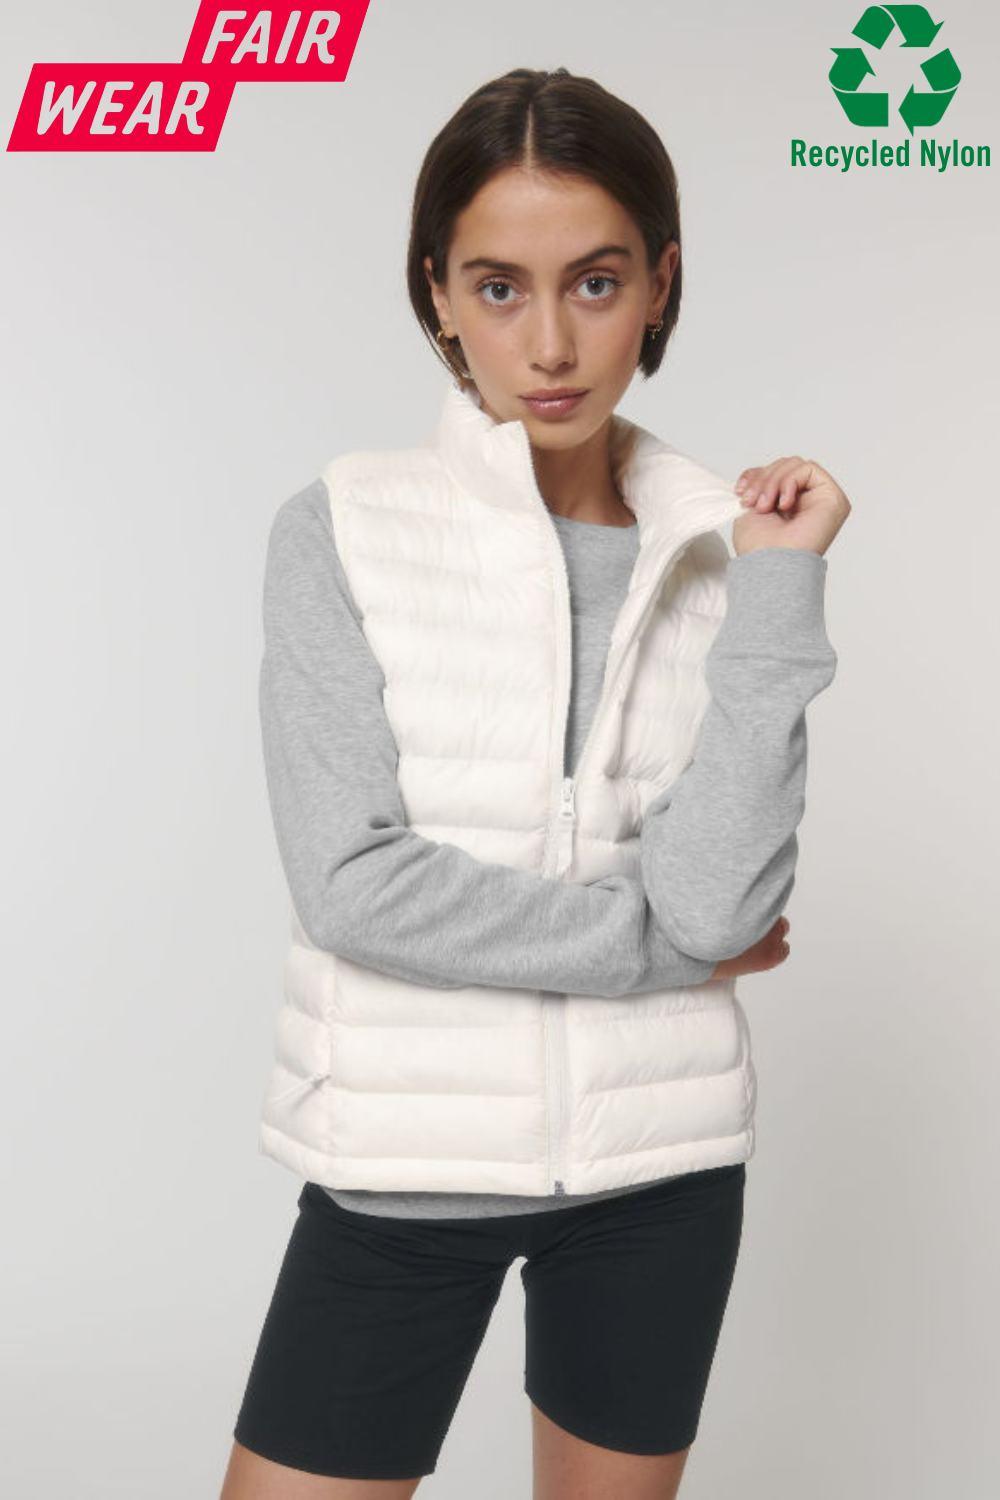 Womens Quilted Bodywarmer Gilet with WHITE Embroidered Logo - Accessories, New, Ready to Ship - Imperfect Pointes